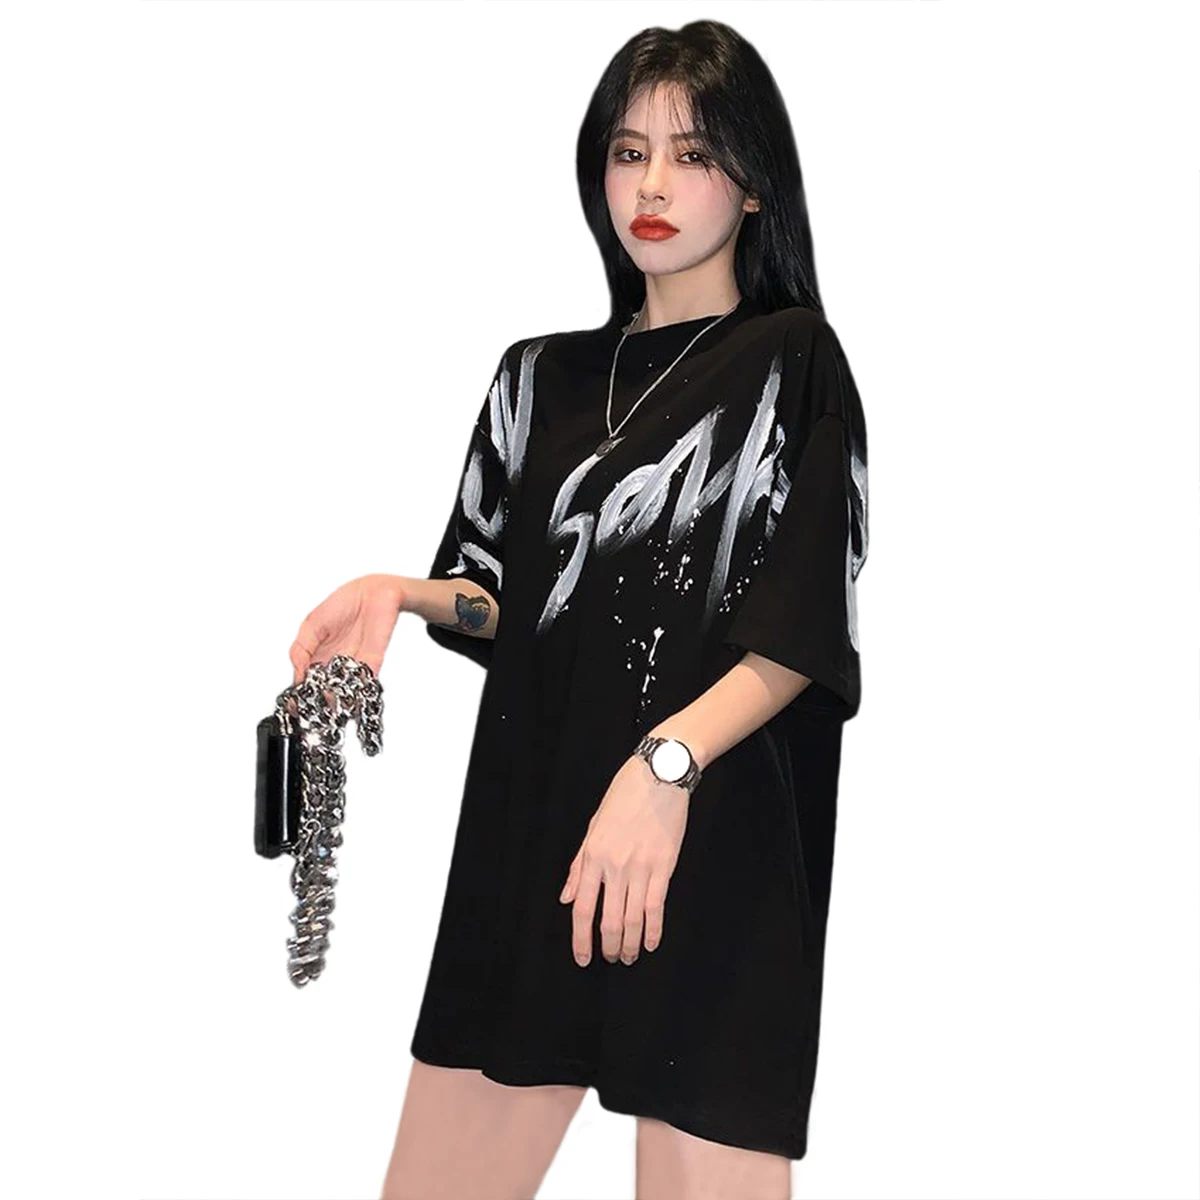 

Women's Lettered Print T-Shirt Hip Hop Street Female O-Neck Tshirt Oversized Summer Loose Short Sleeve Size Tee Gothic Top TS028